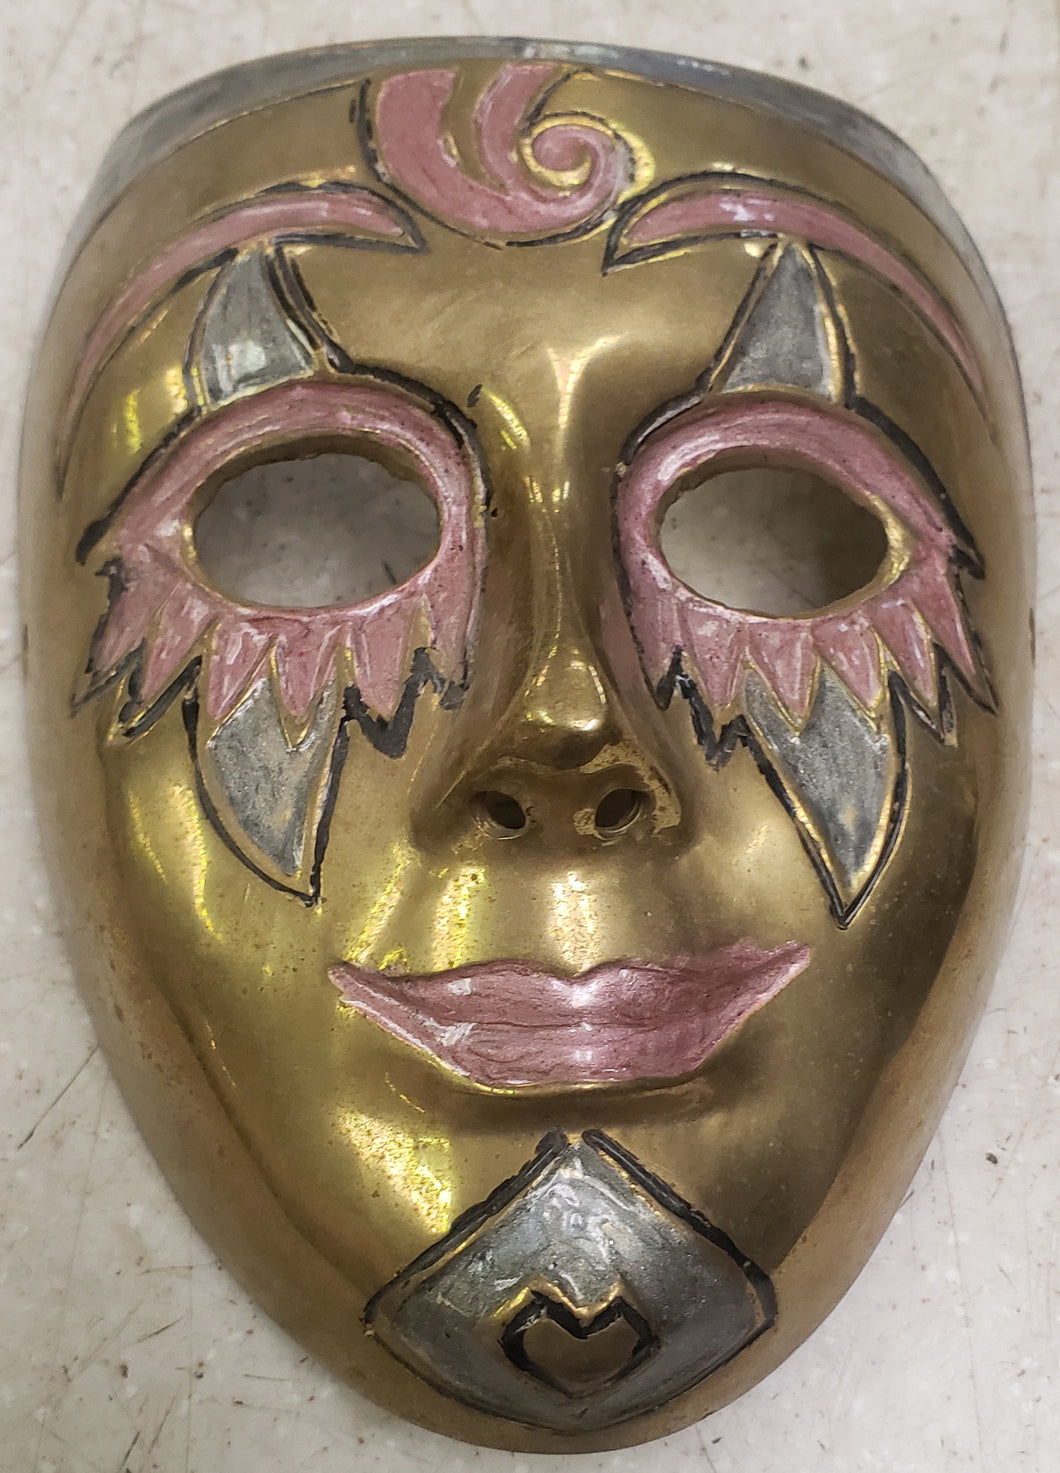 Vintage Remco Decorative Metal Mask - Made in India (5-3/4